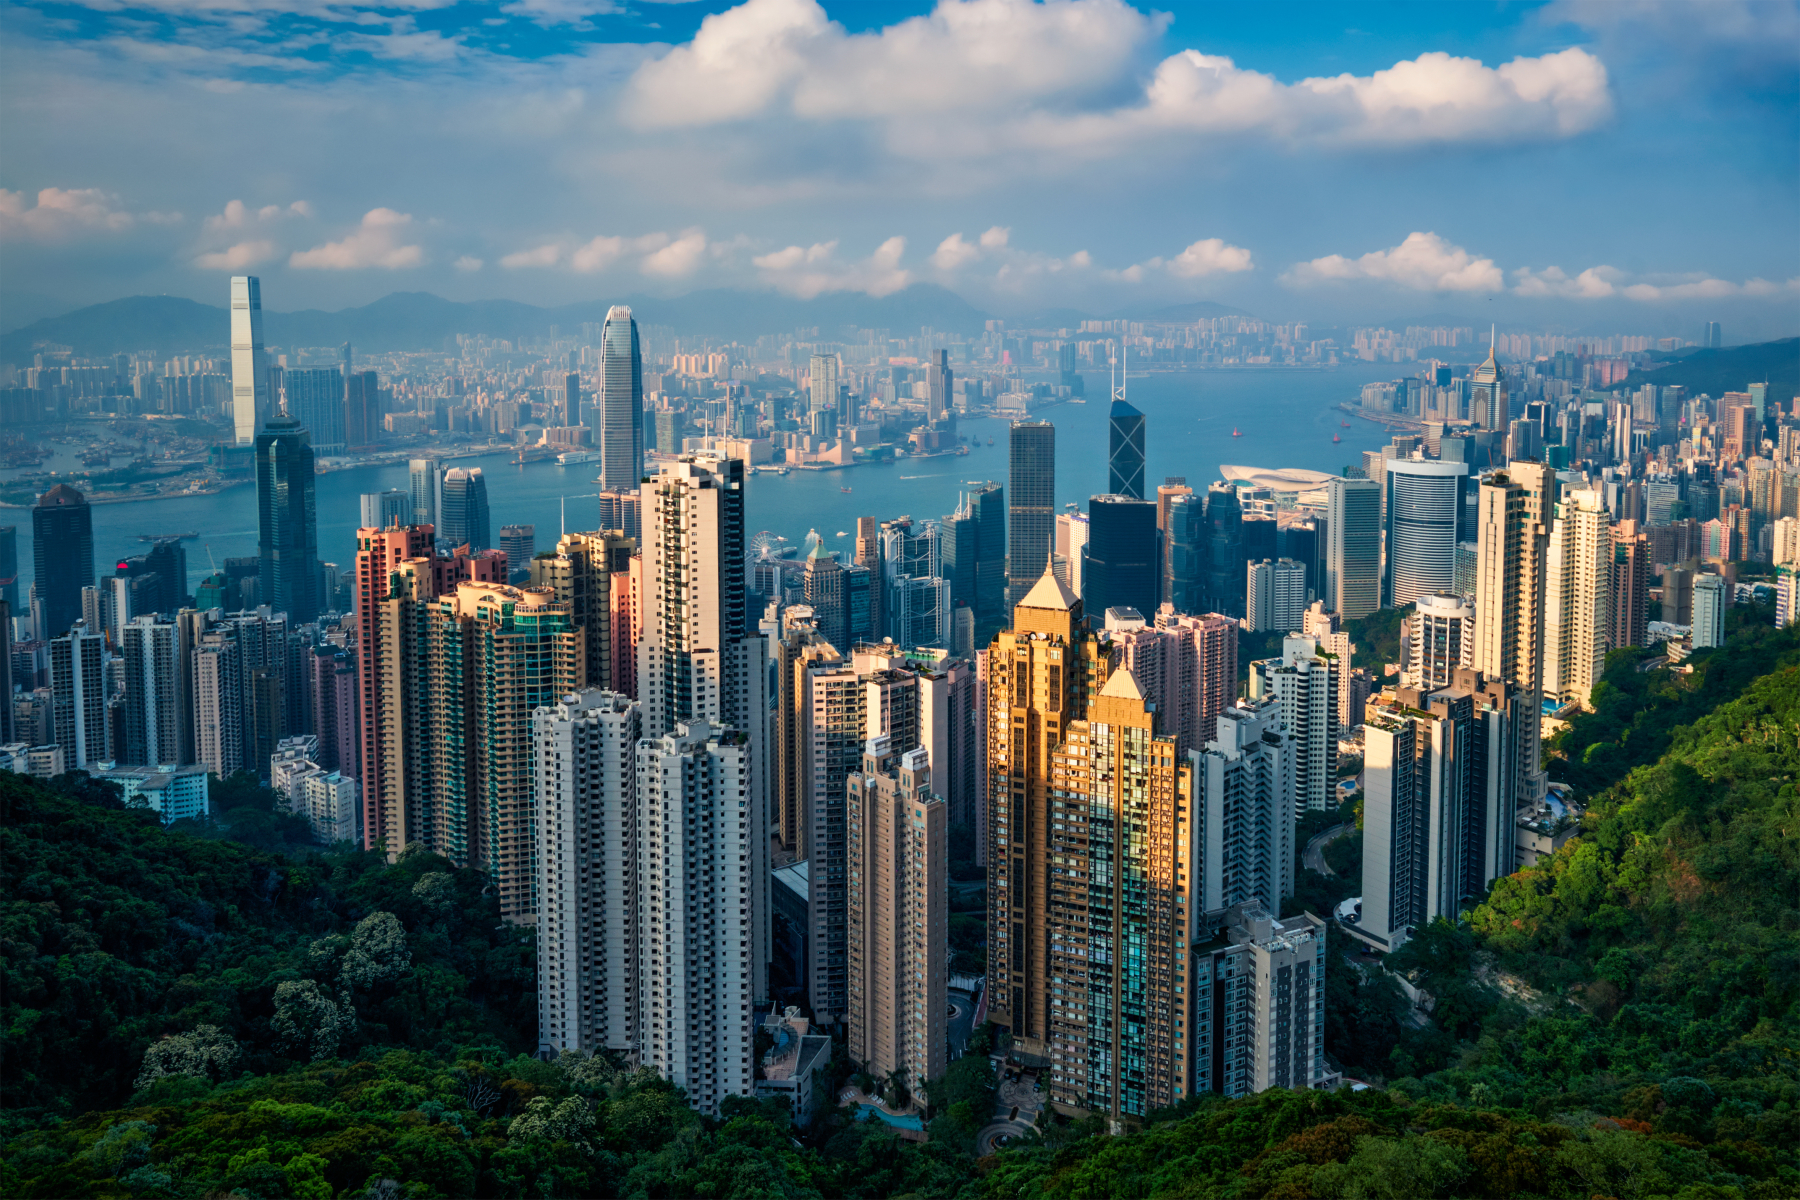 Hong Kong wants to become a crypto hub despite the crisis in the industry
